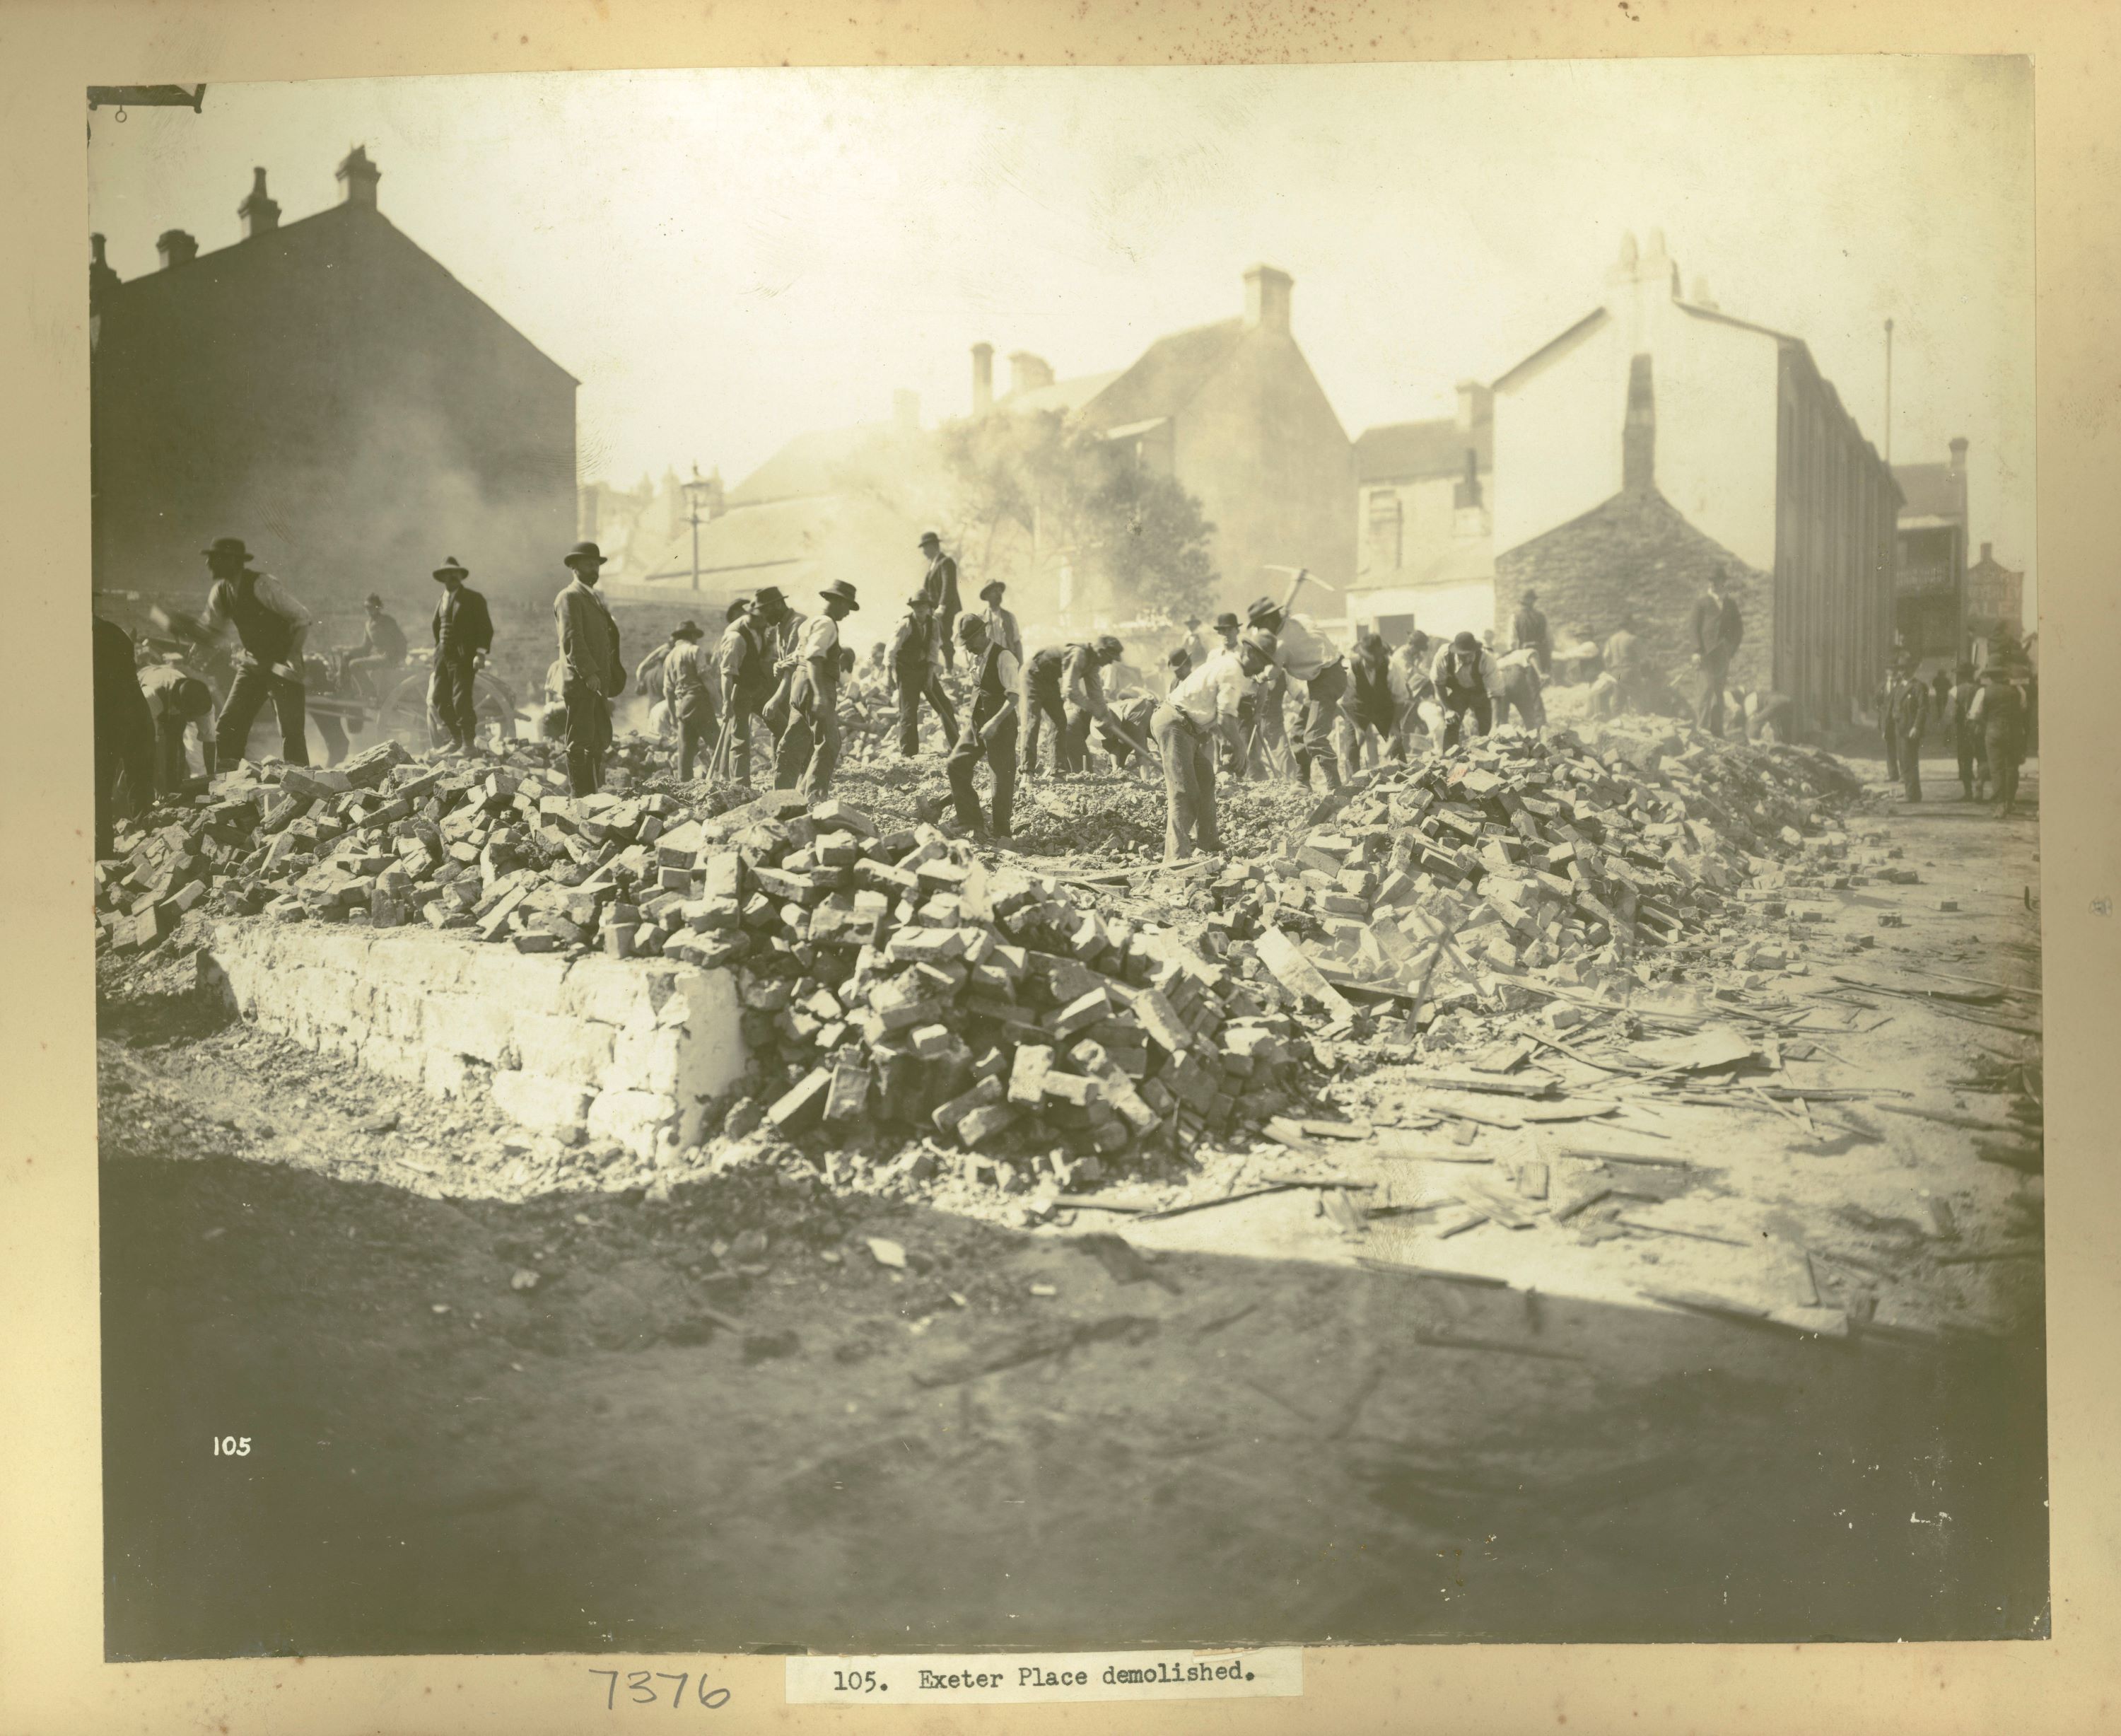 Workers stand in the rubble of a demolished building 